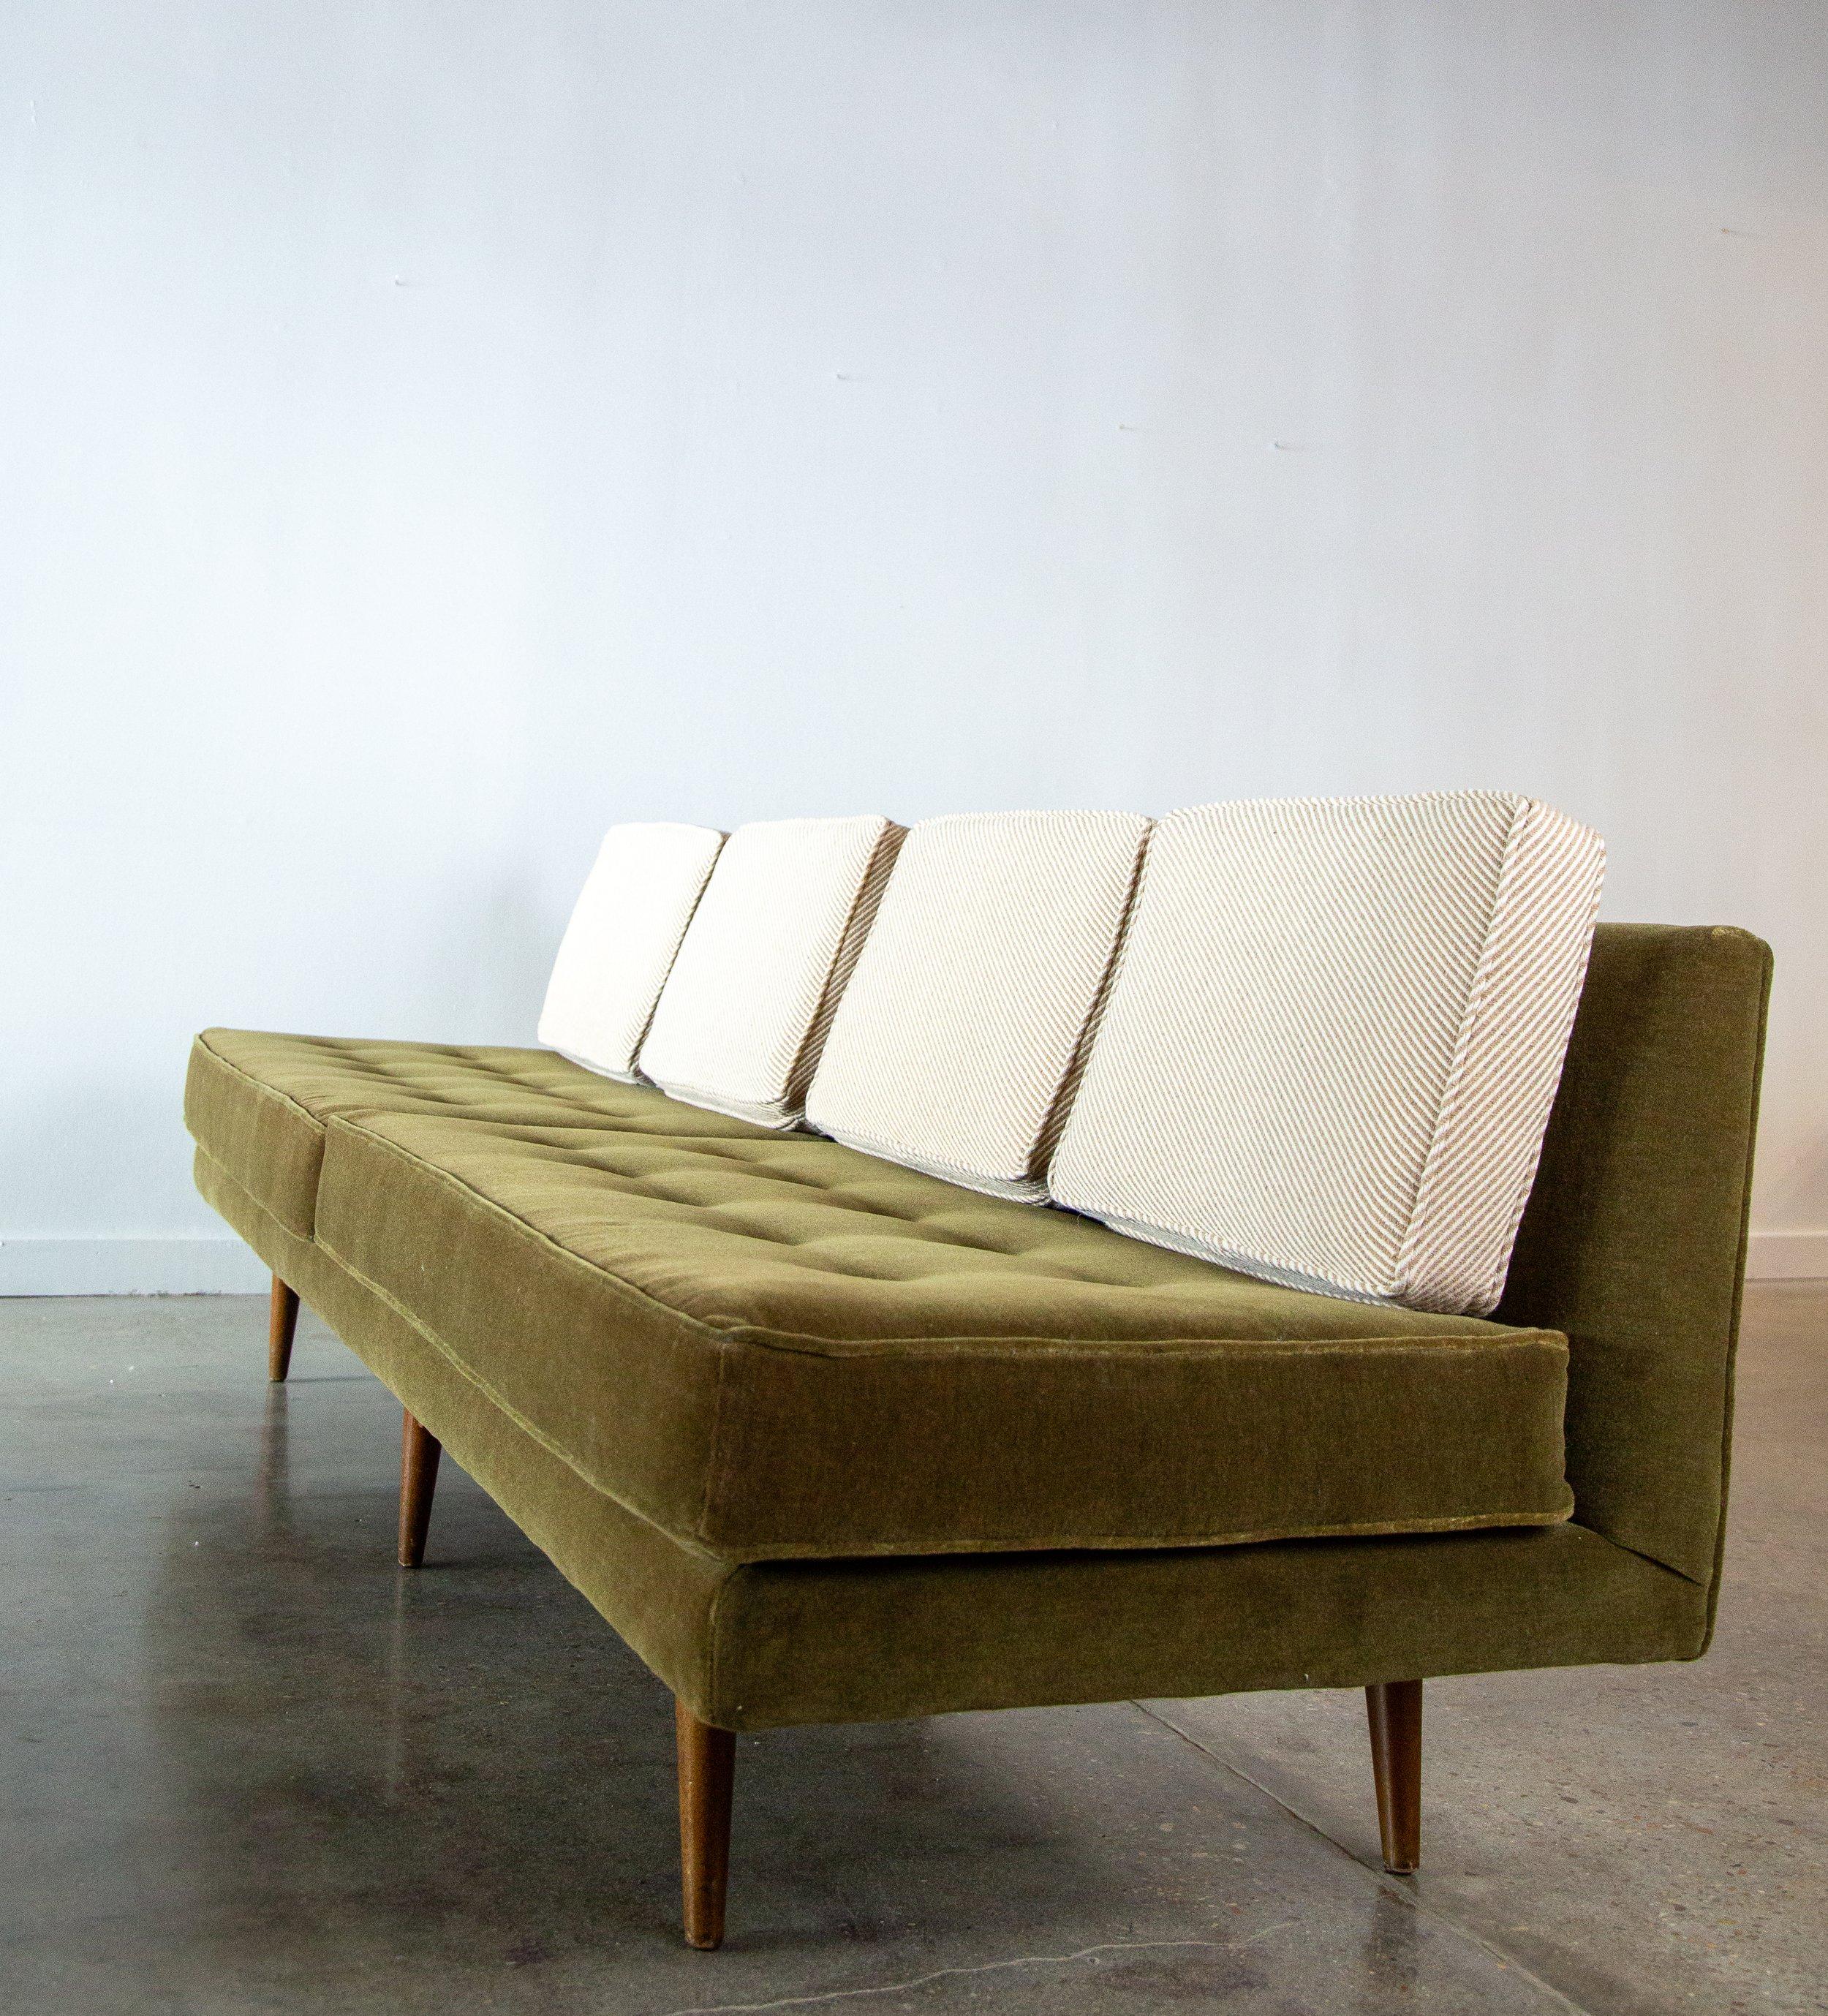 A 1950s iconic armless sofa designed by Edward Wormley for Dunbar Furniture model 5526. Reupholstered in a green mohair base with neutral diagonal striped wool loose cushions.  A very airy form the sofa looks like its floating on the 6 legs. New